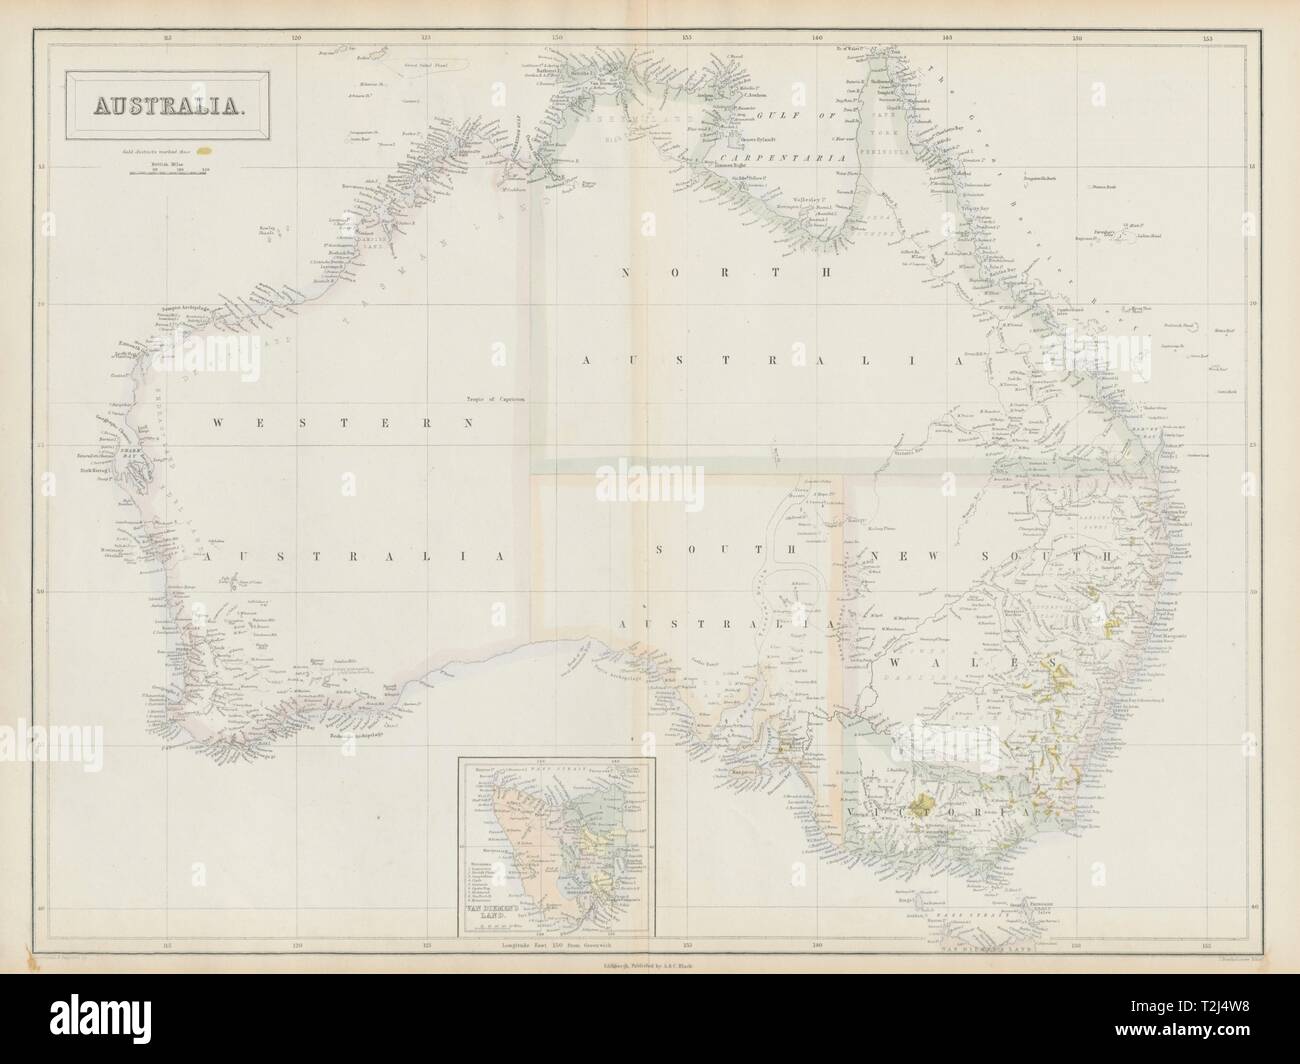 Gold rush Australia showing gold districts in yellow. SIDNEY HALL 1856 map  Stock Photo - Alamy